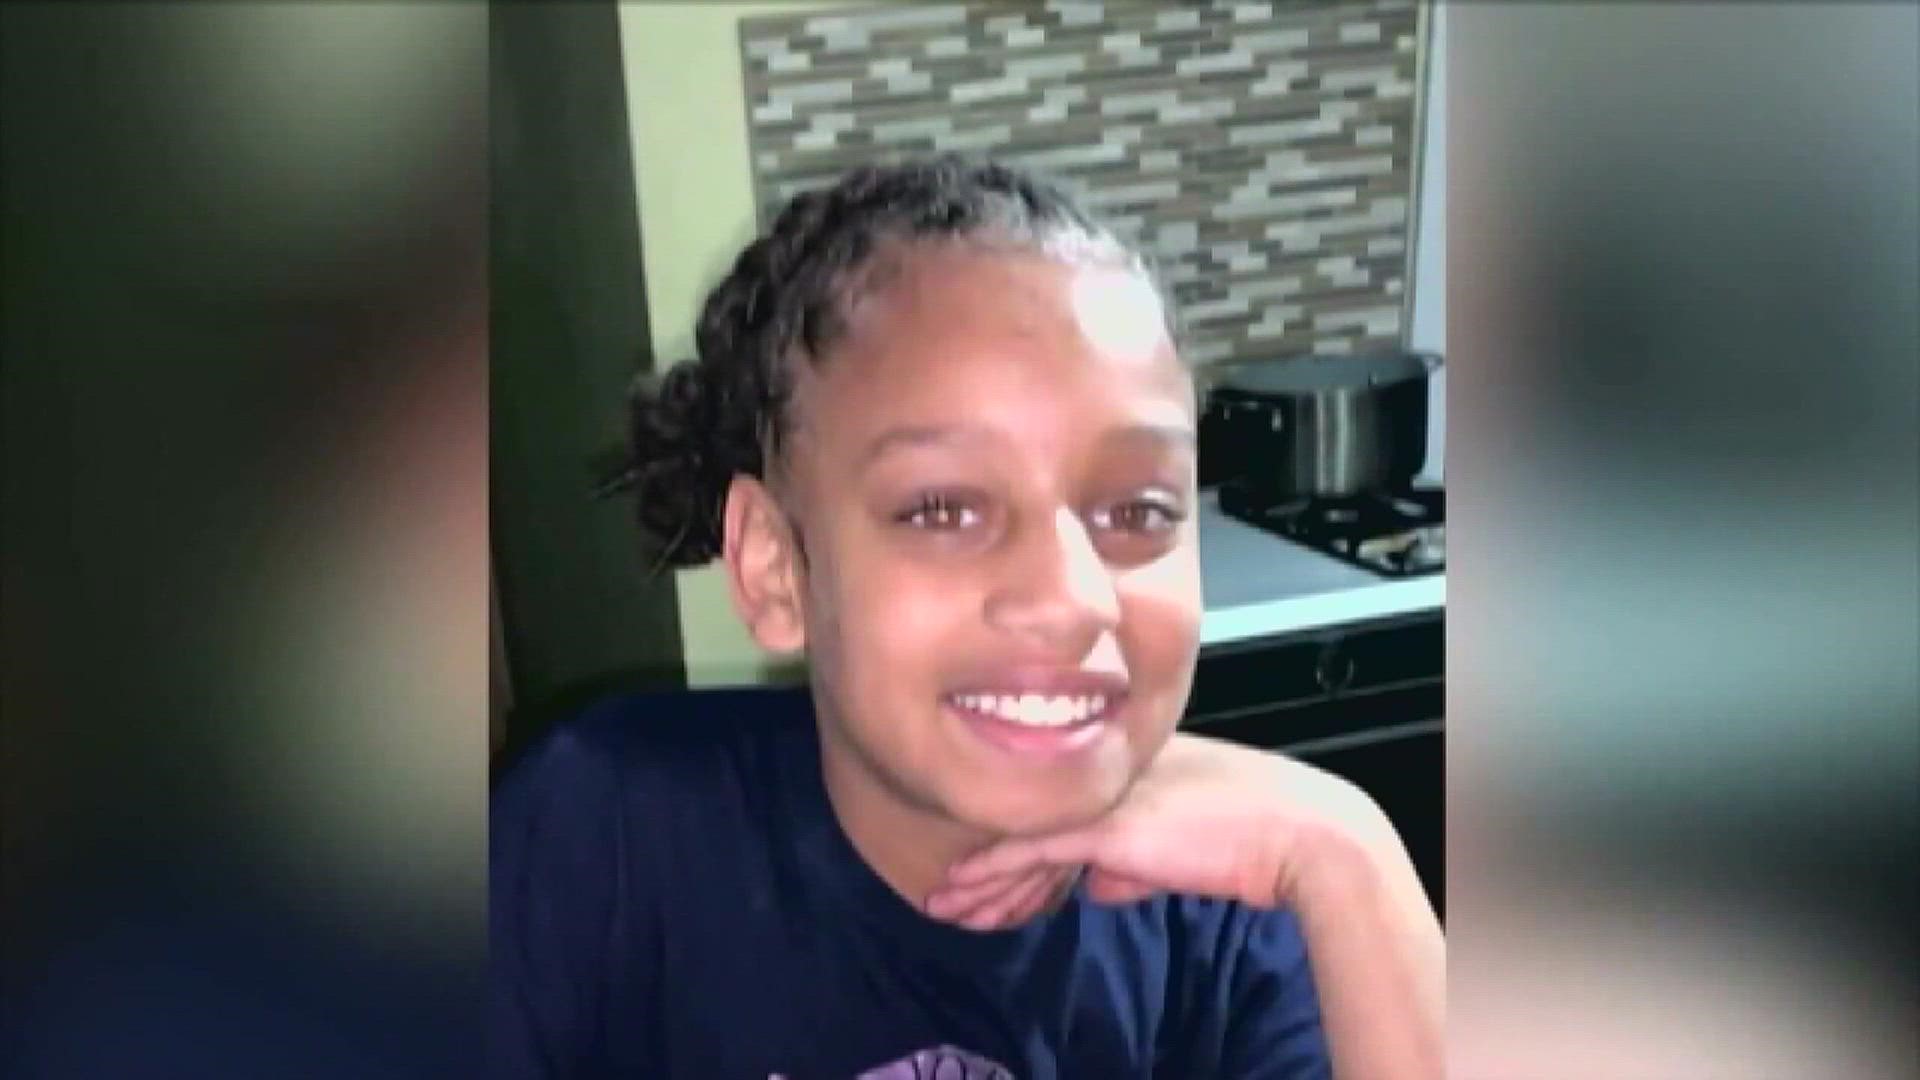 The 10-year-old Davenport girl went missing back in July 2020, sparking a community-wide search.